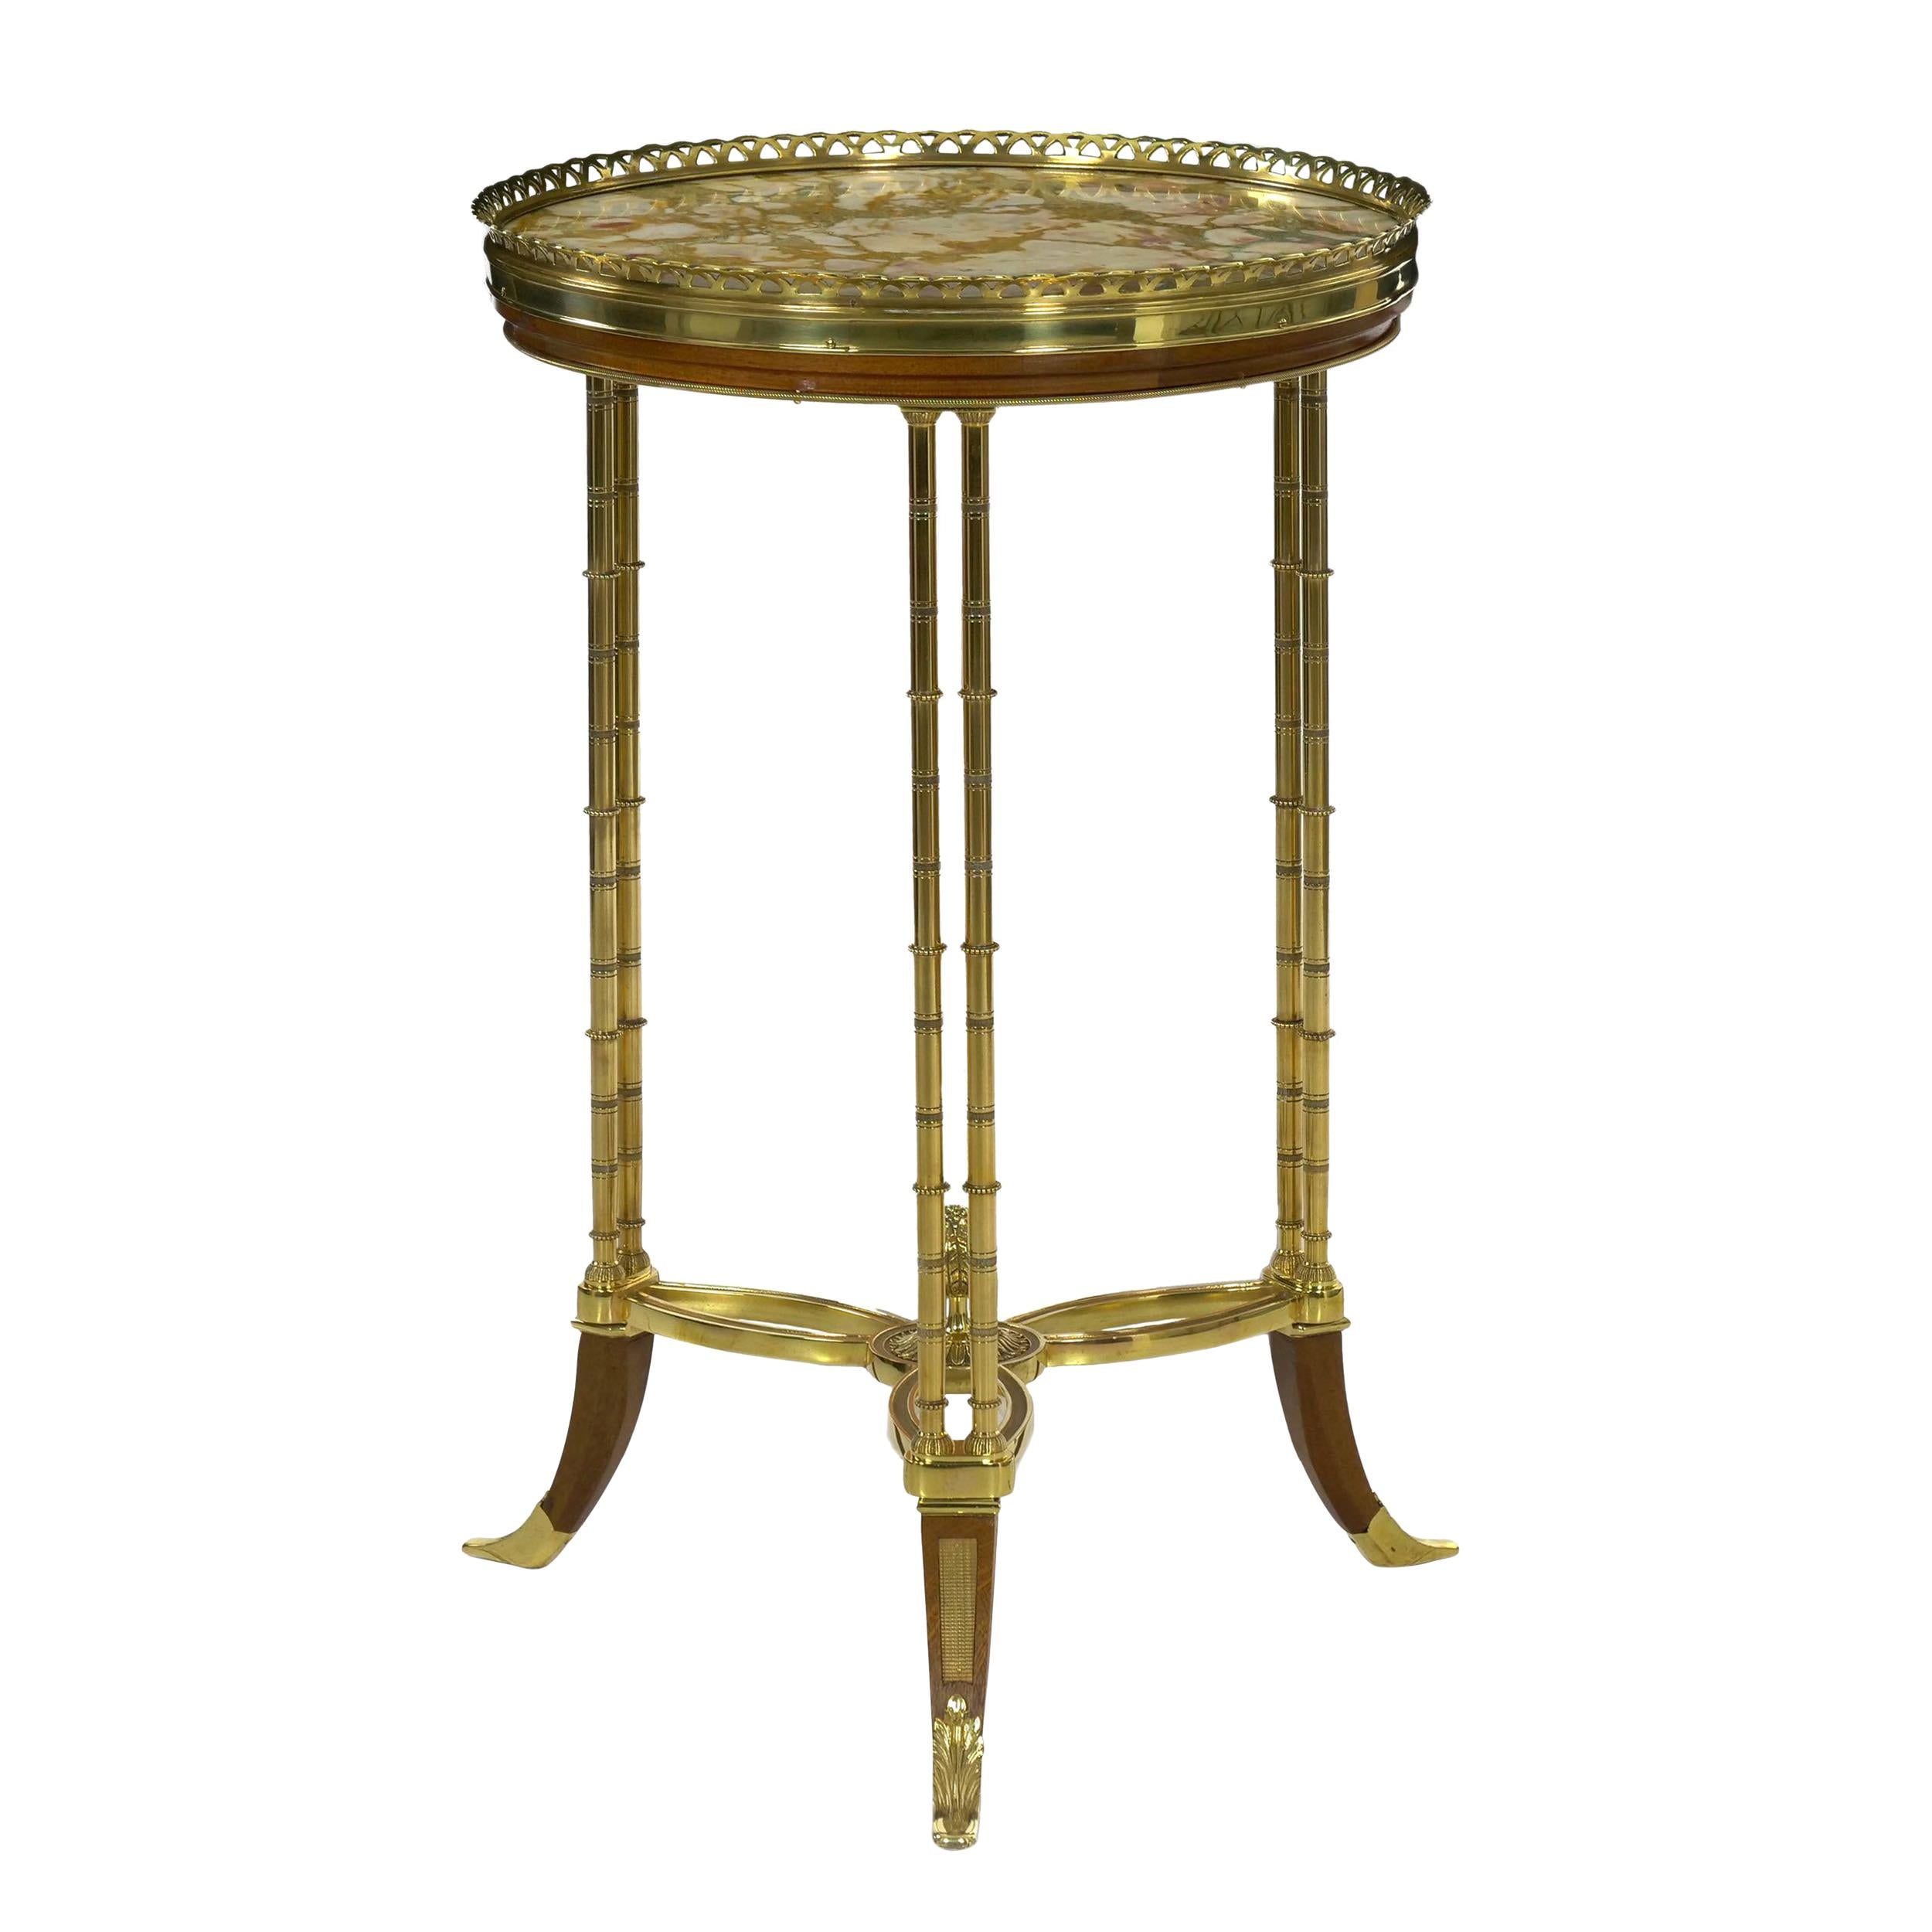 French Neoclassical Antique Round Accent Side Table in Maison Jansen Style